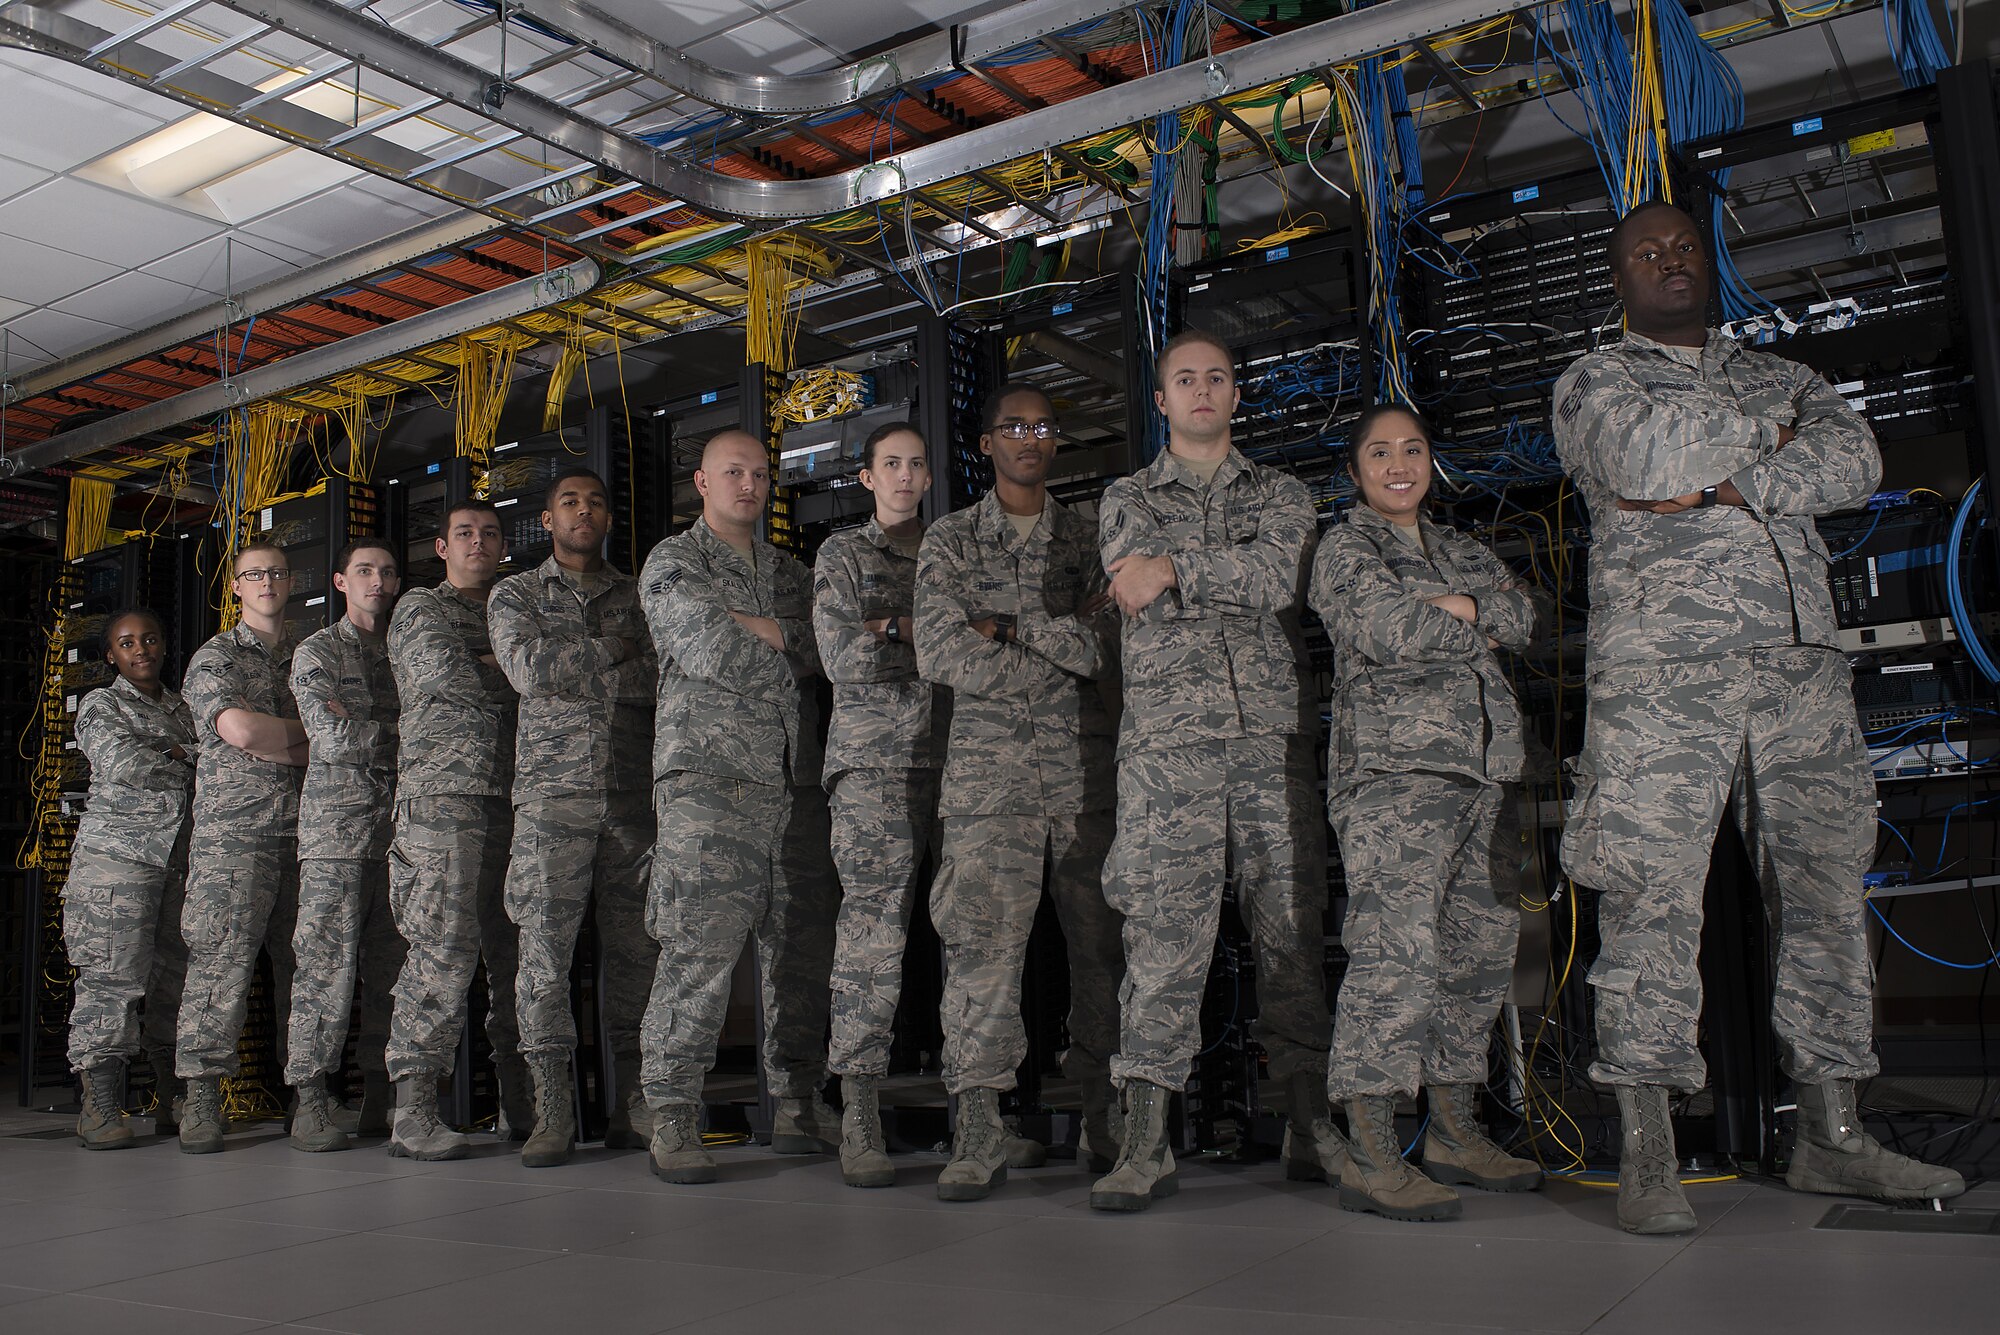 U.S. Air Force technicians assigned to the 6th Communications Squadron (CS) base infrastructure shop pause for a photo, June 15, 2017 at MacDill Air Force Base, Fla. The 6th CS is in the process of installing a new system upgrade, which drastically improves network security. (U.S. Air Force photo by Airman 1st Class Caleb Nunez)